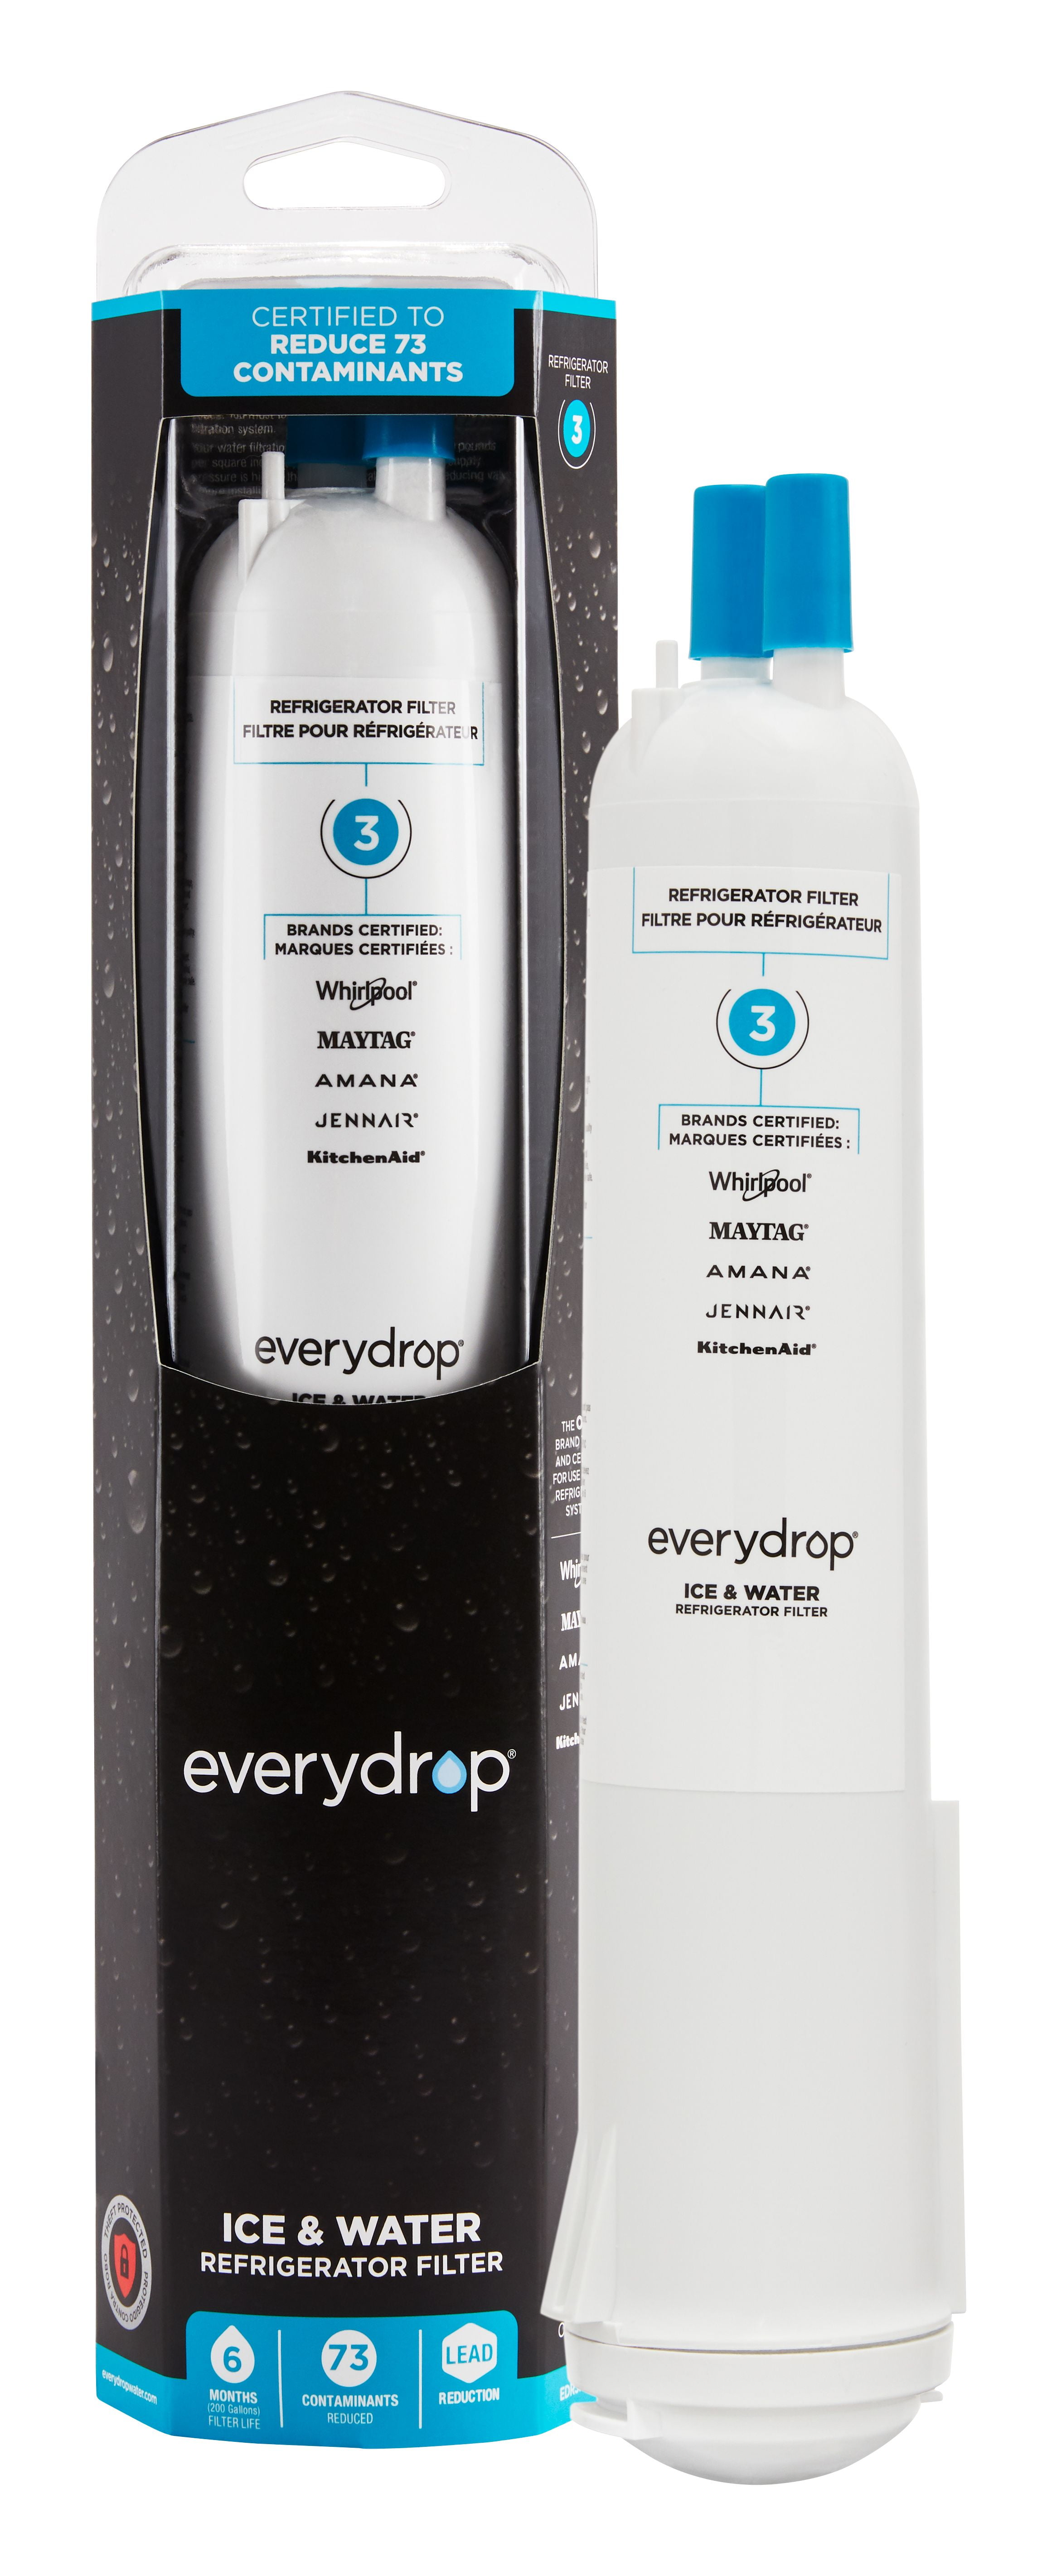 everydrop-ice-and-water-refrigerator-filter-water-filters-home-garden